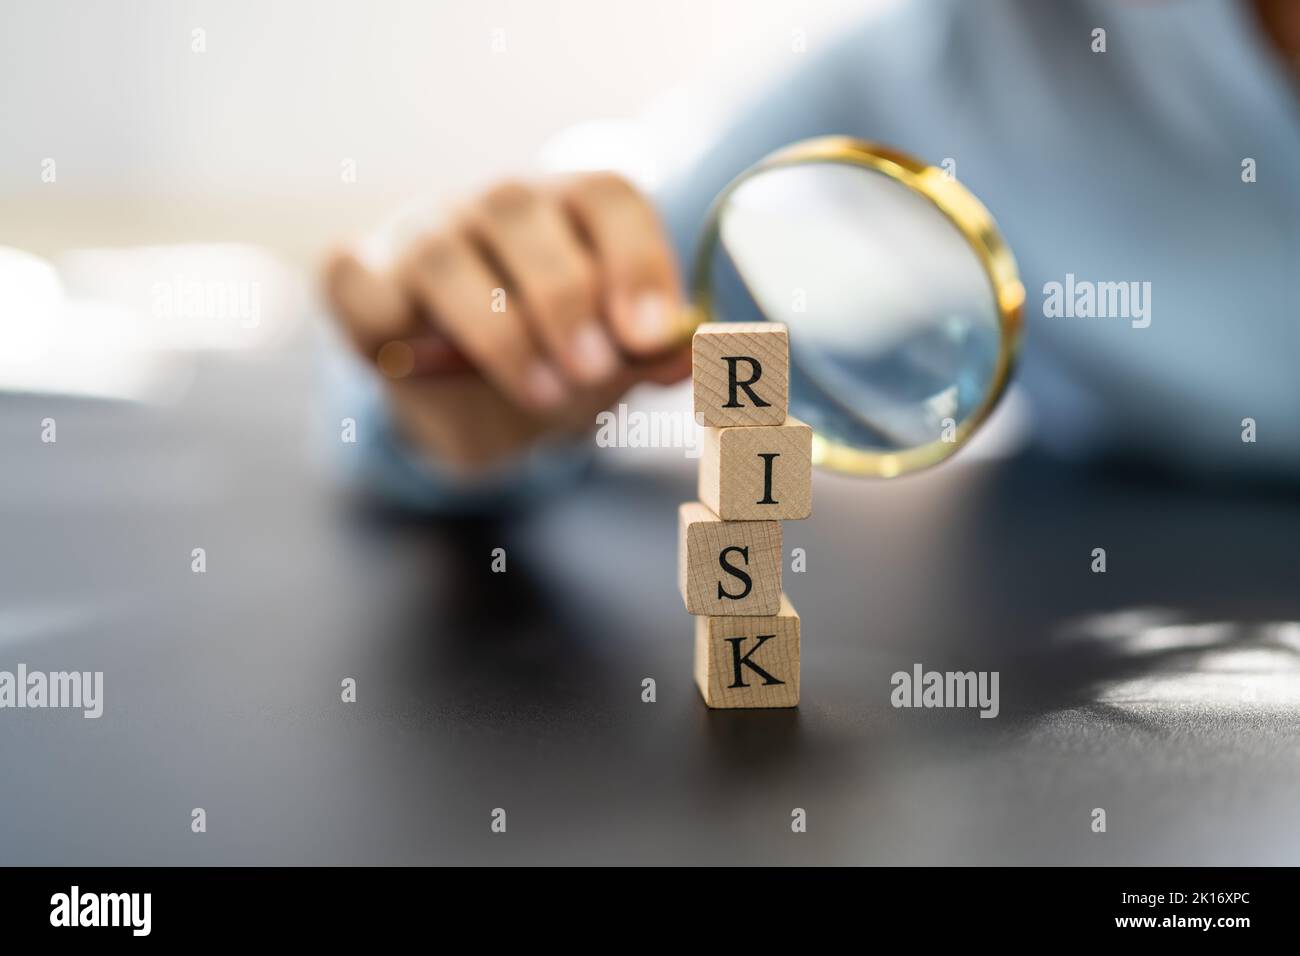 Hand Looking At Risk Blocks Through Magnifying Glass On Wooden Desk Stock Photo